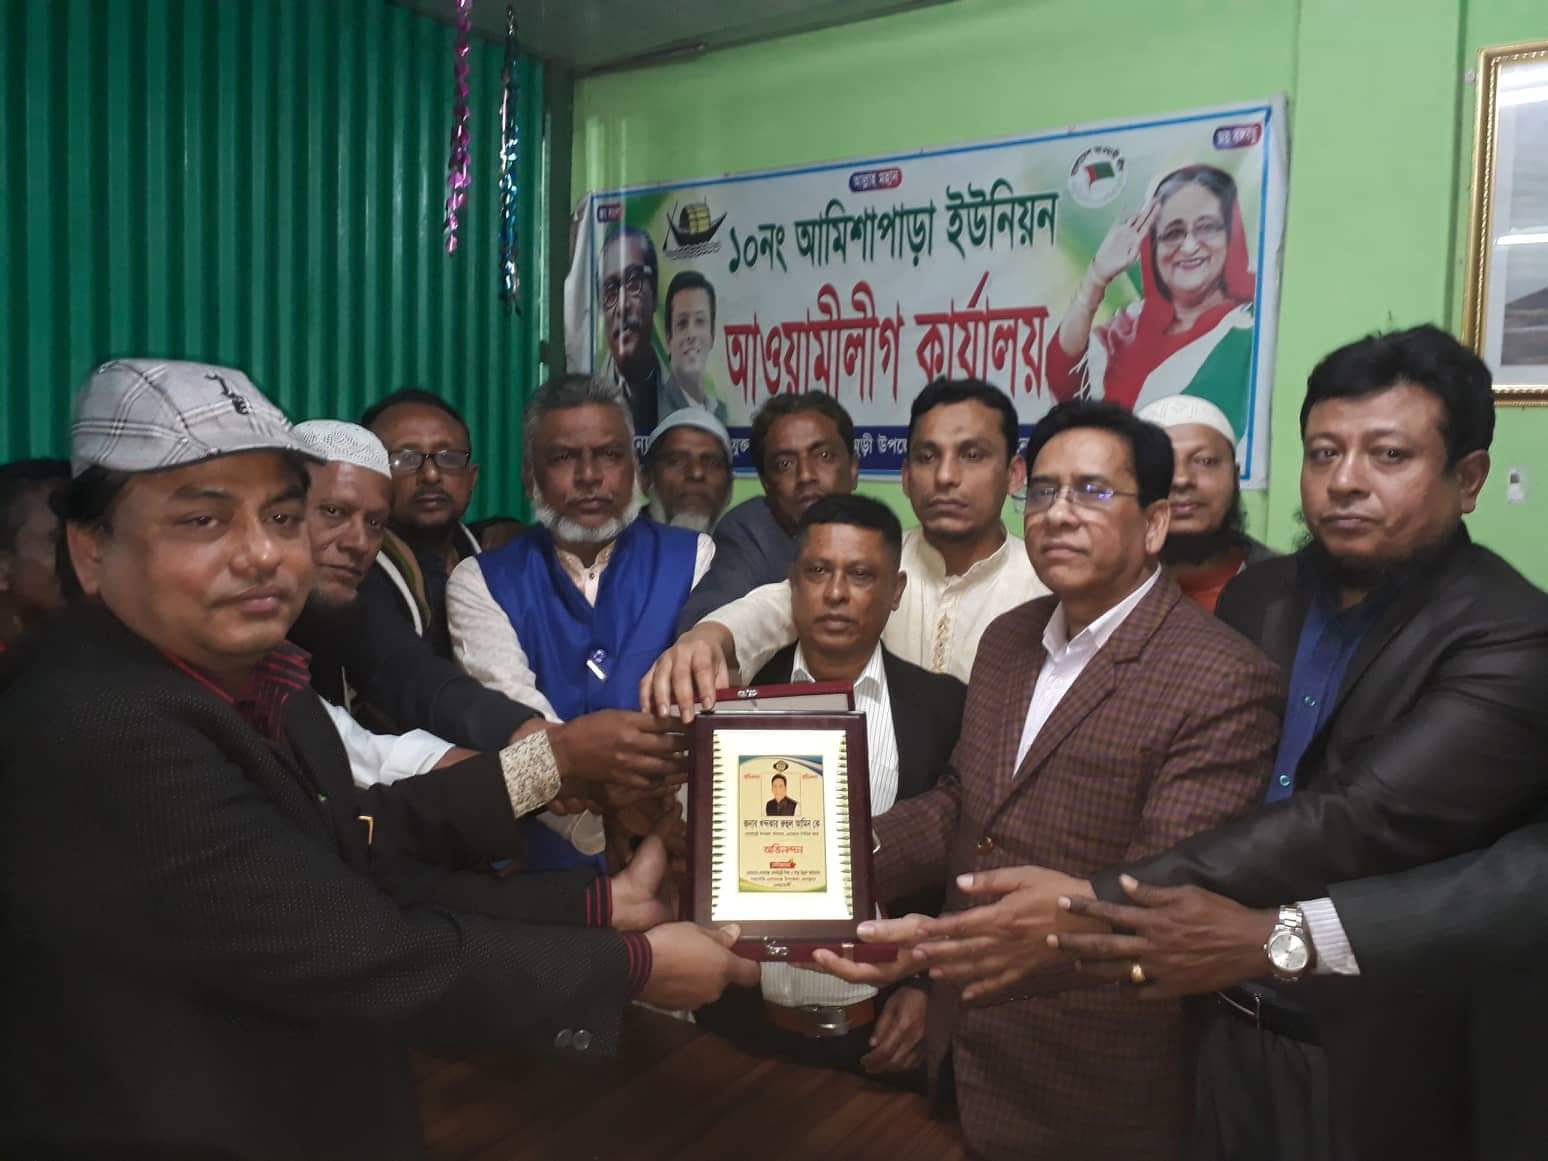 In the picture- Foundation Chairman Gias Uddin Mithu handed over the honor crest to Sonamuri Upazila Chairman Khandaker Ruhul Amin on behalf of the Foundation.